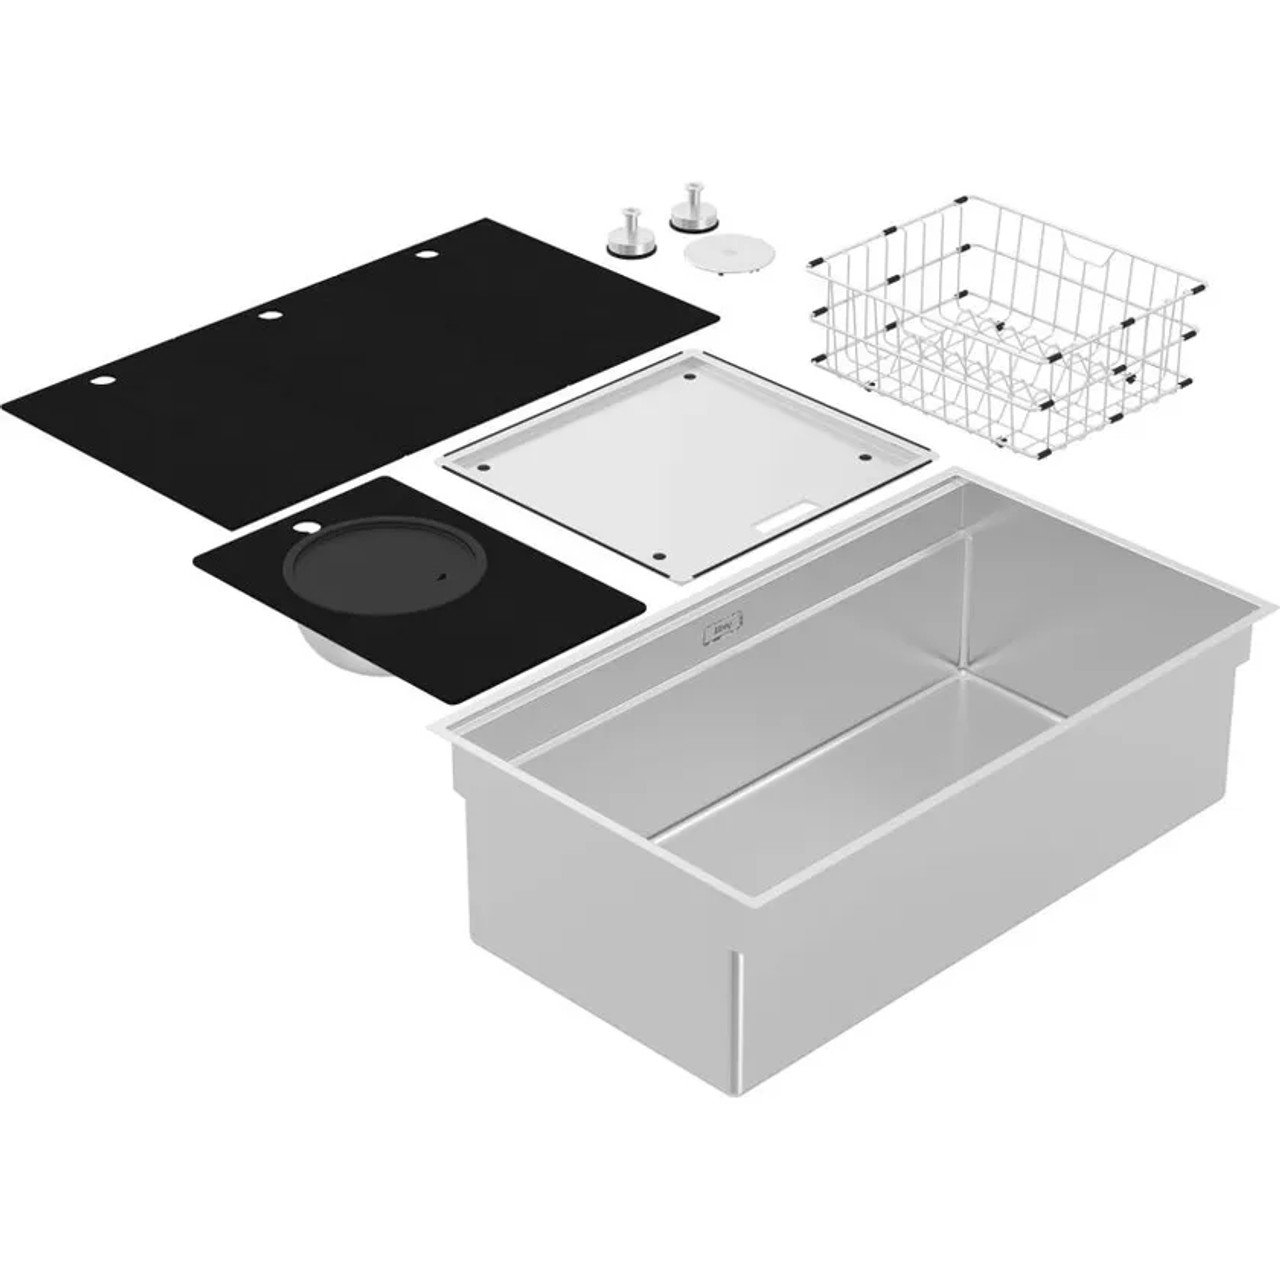 Abey  Boutique Piazza Plus Single Bowl Stainless Steel Sink 